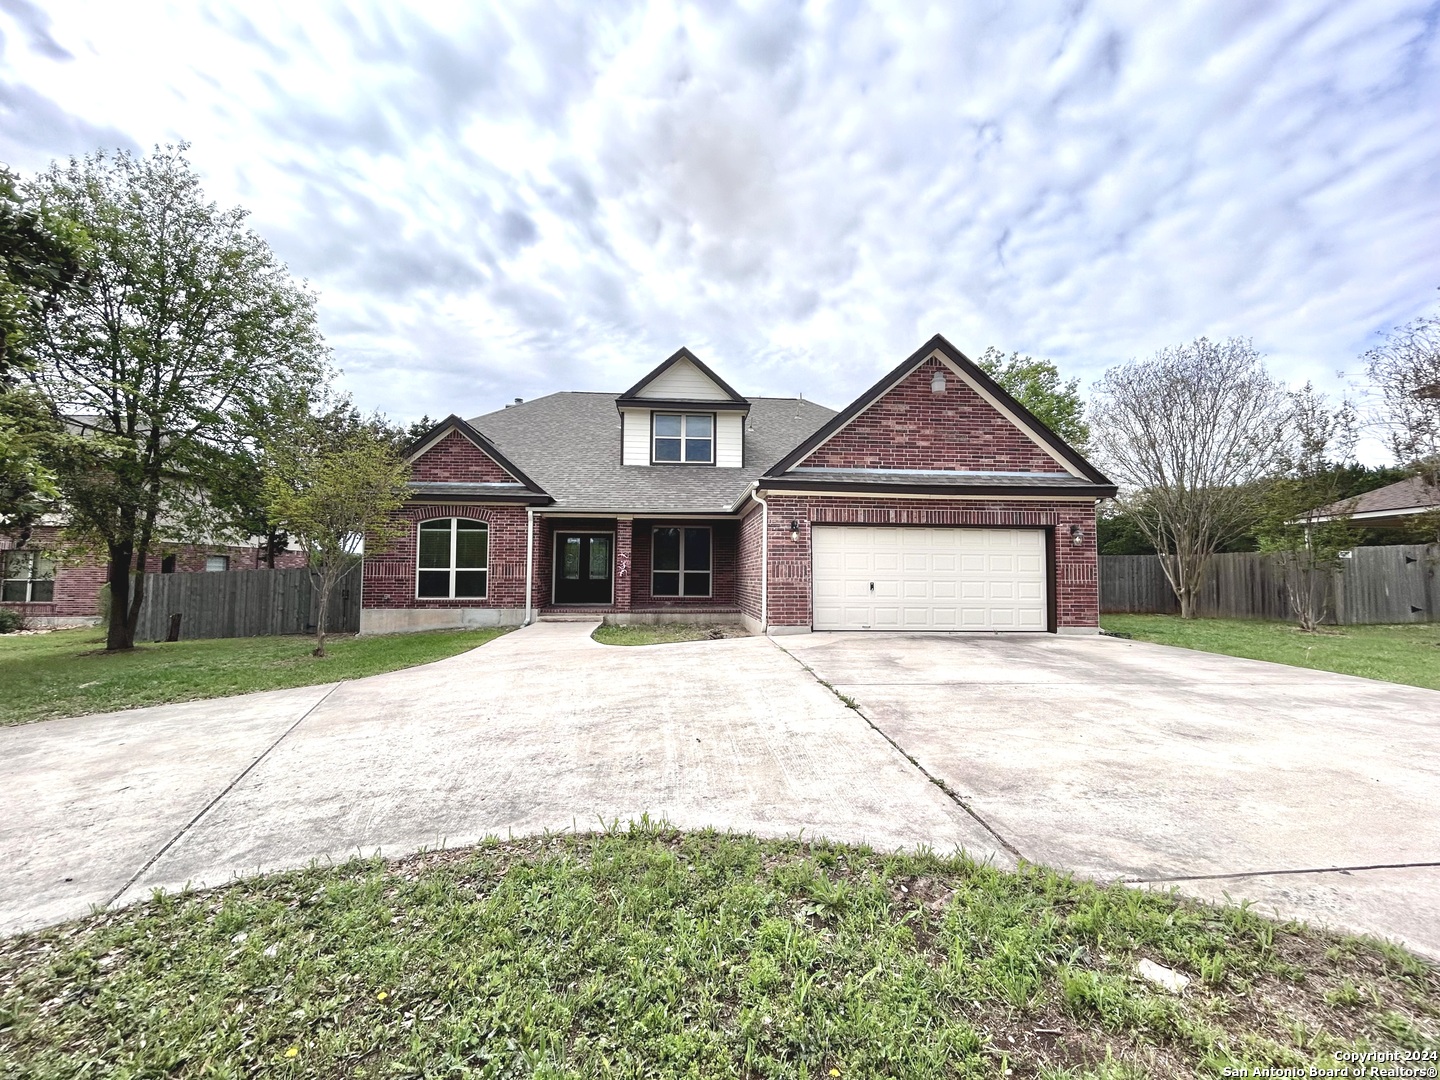 Photo of 15425 Flying Cir in Helotes, TX